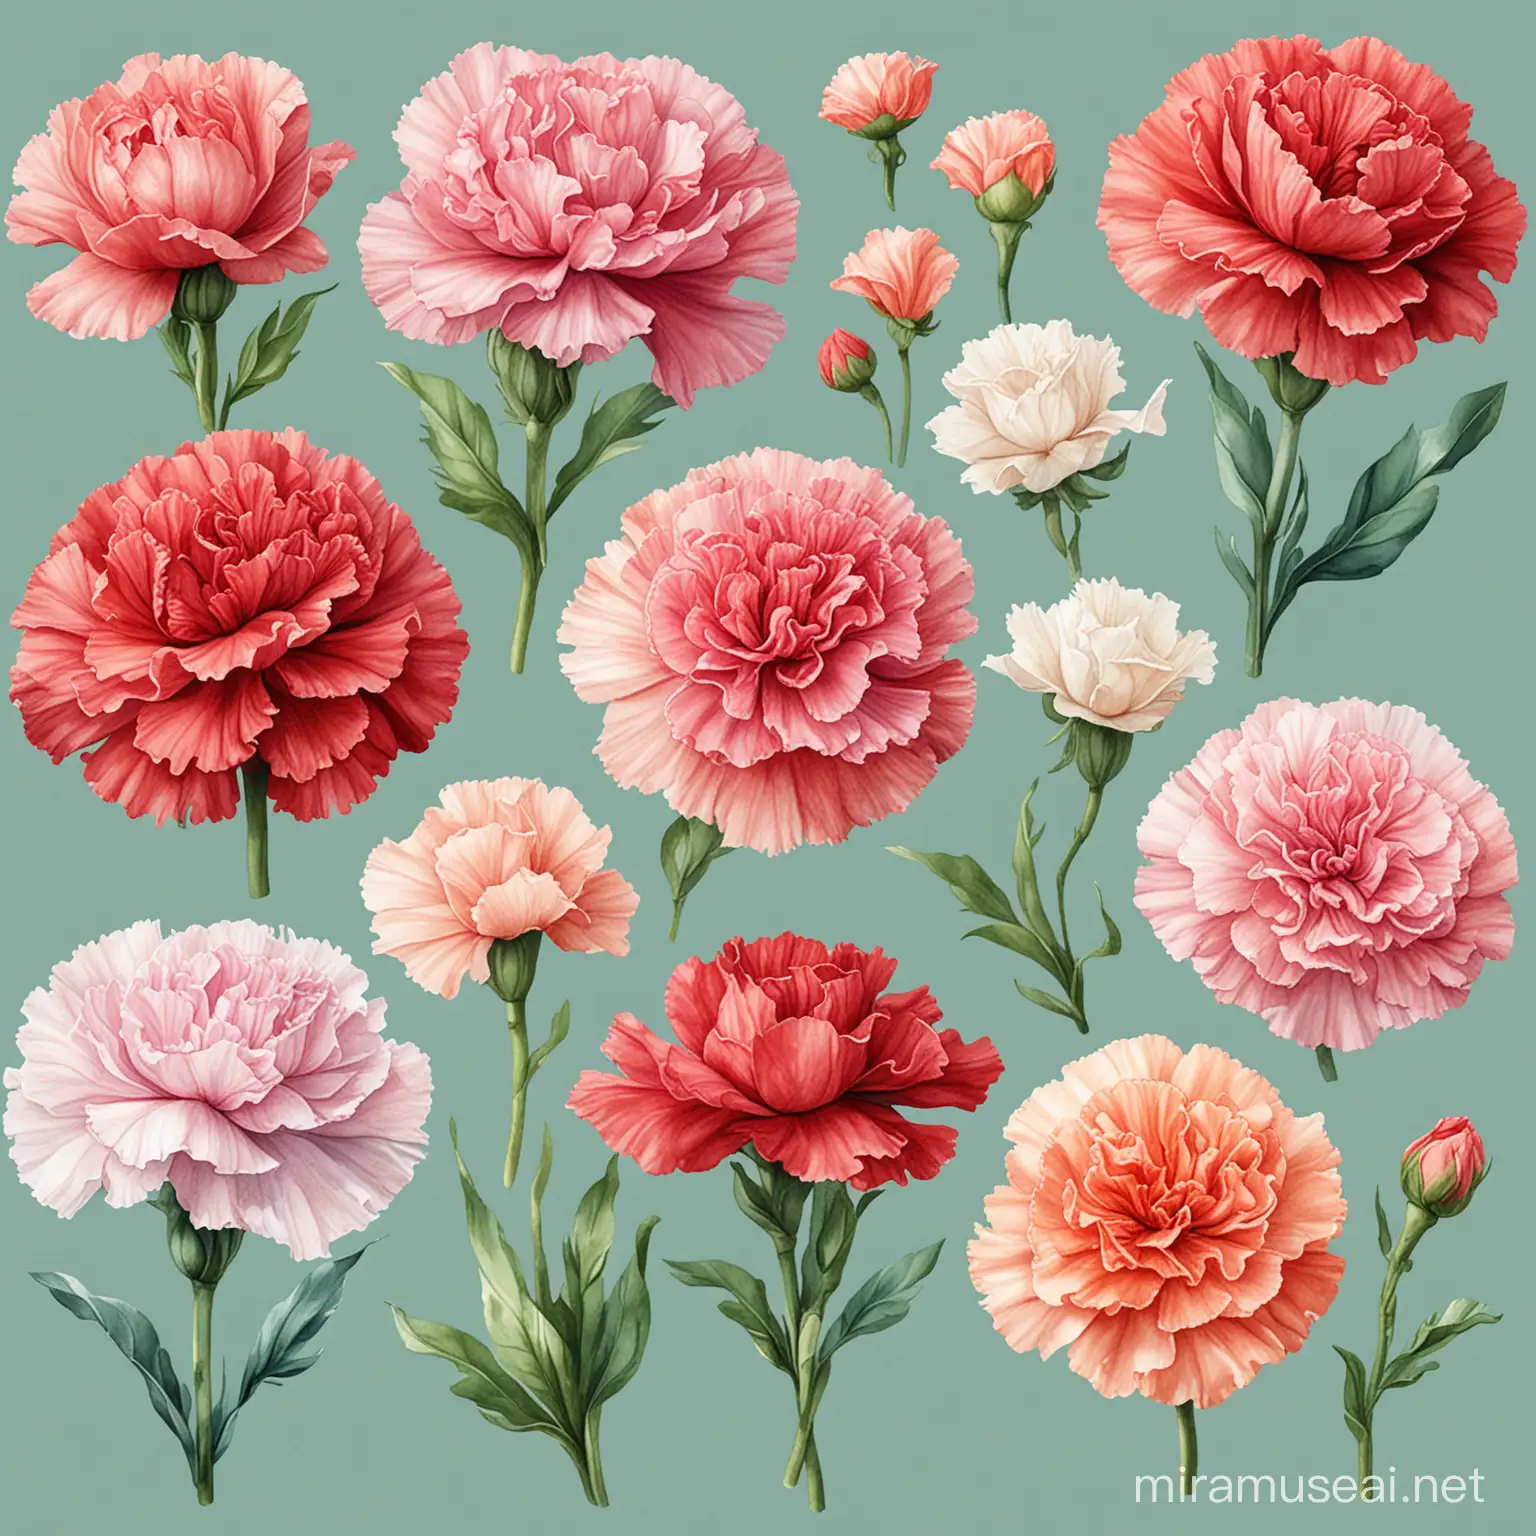 Watercolor Carnation Clipart in Pink Red and White Shades